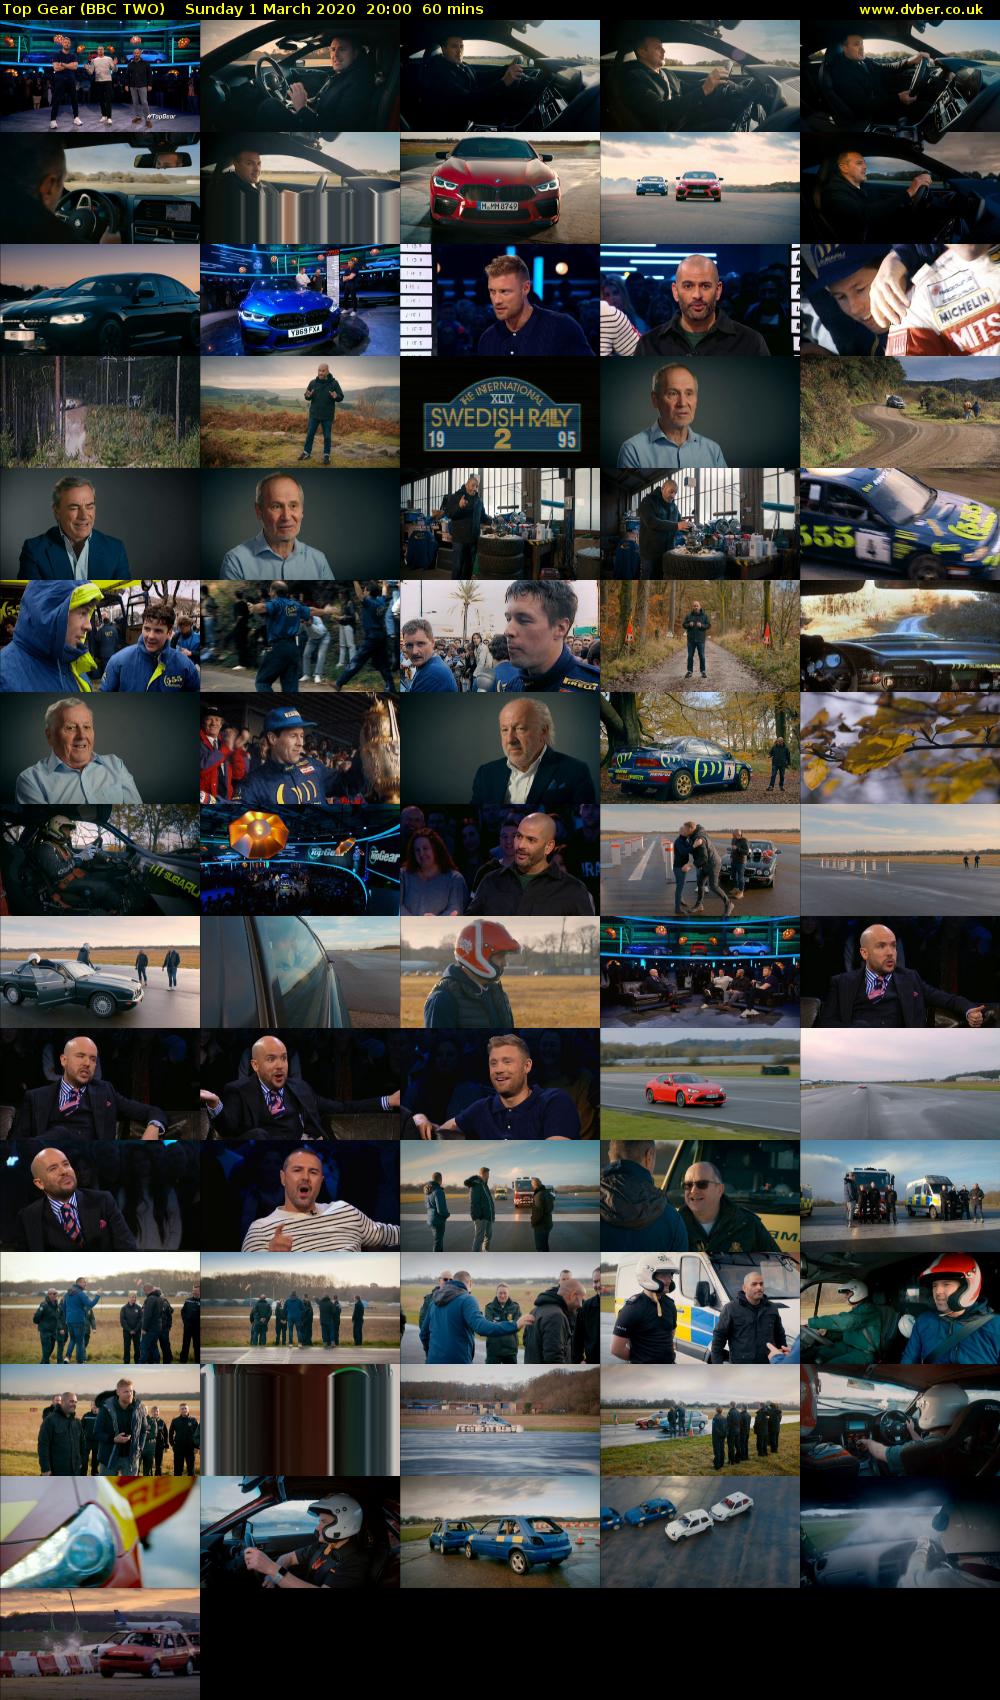 Top Gear (BBC TWO) Sunday 1 March 2020 20:00 - 21:00